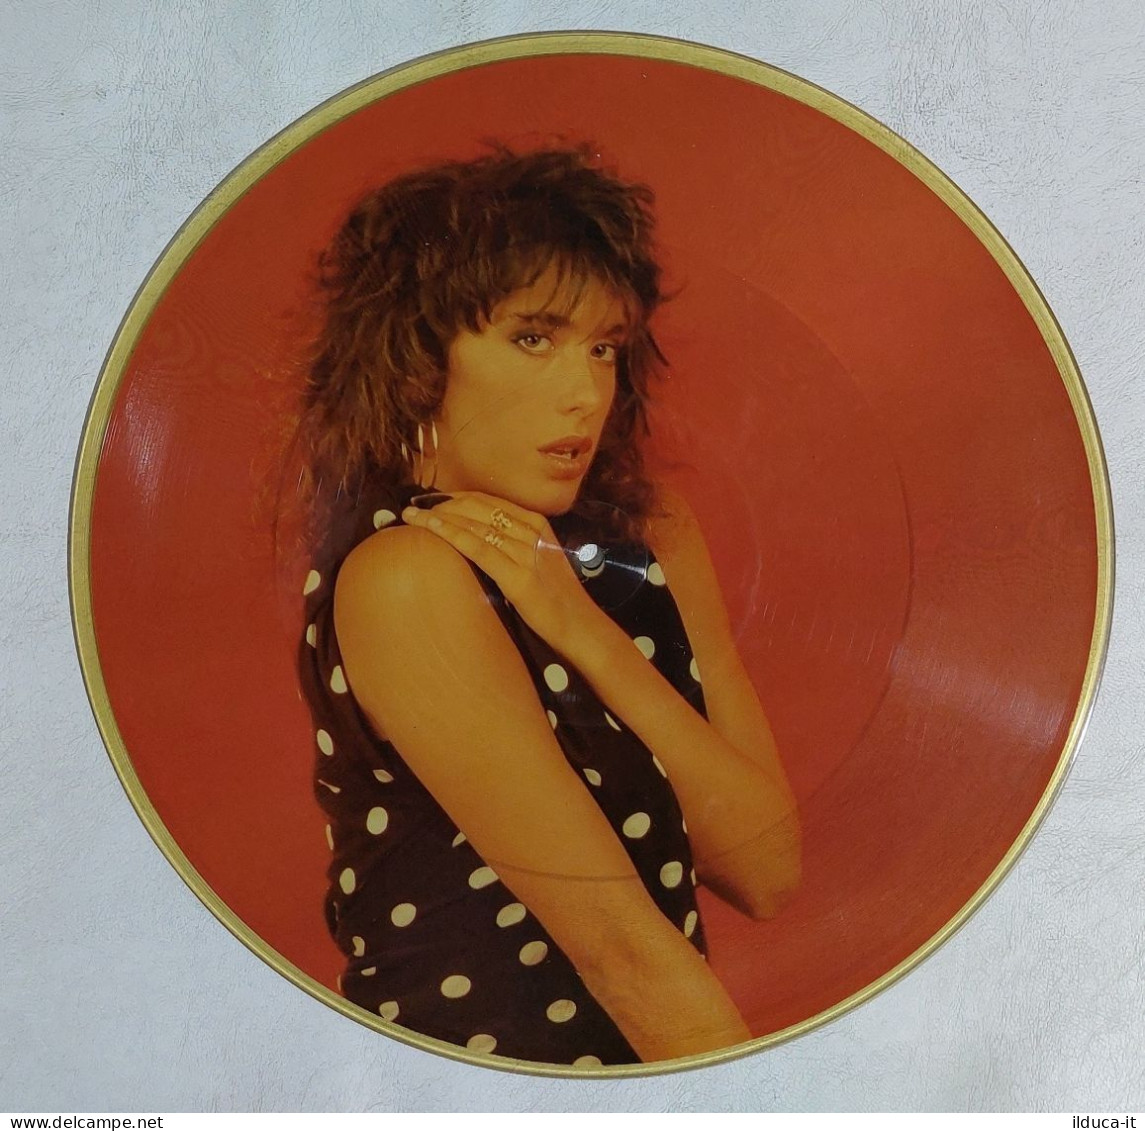 I114366 LP 33 Giri Picture Disc - Sabrina Salerno - Hot Girl - Five 1987 - Editions Limitées